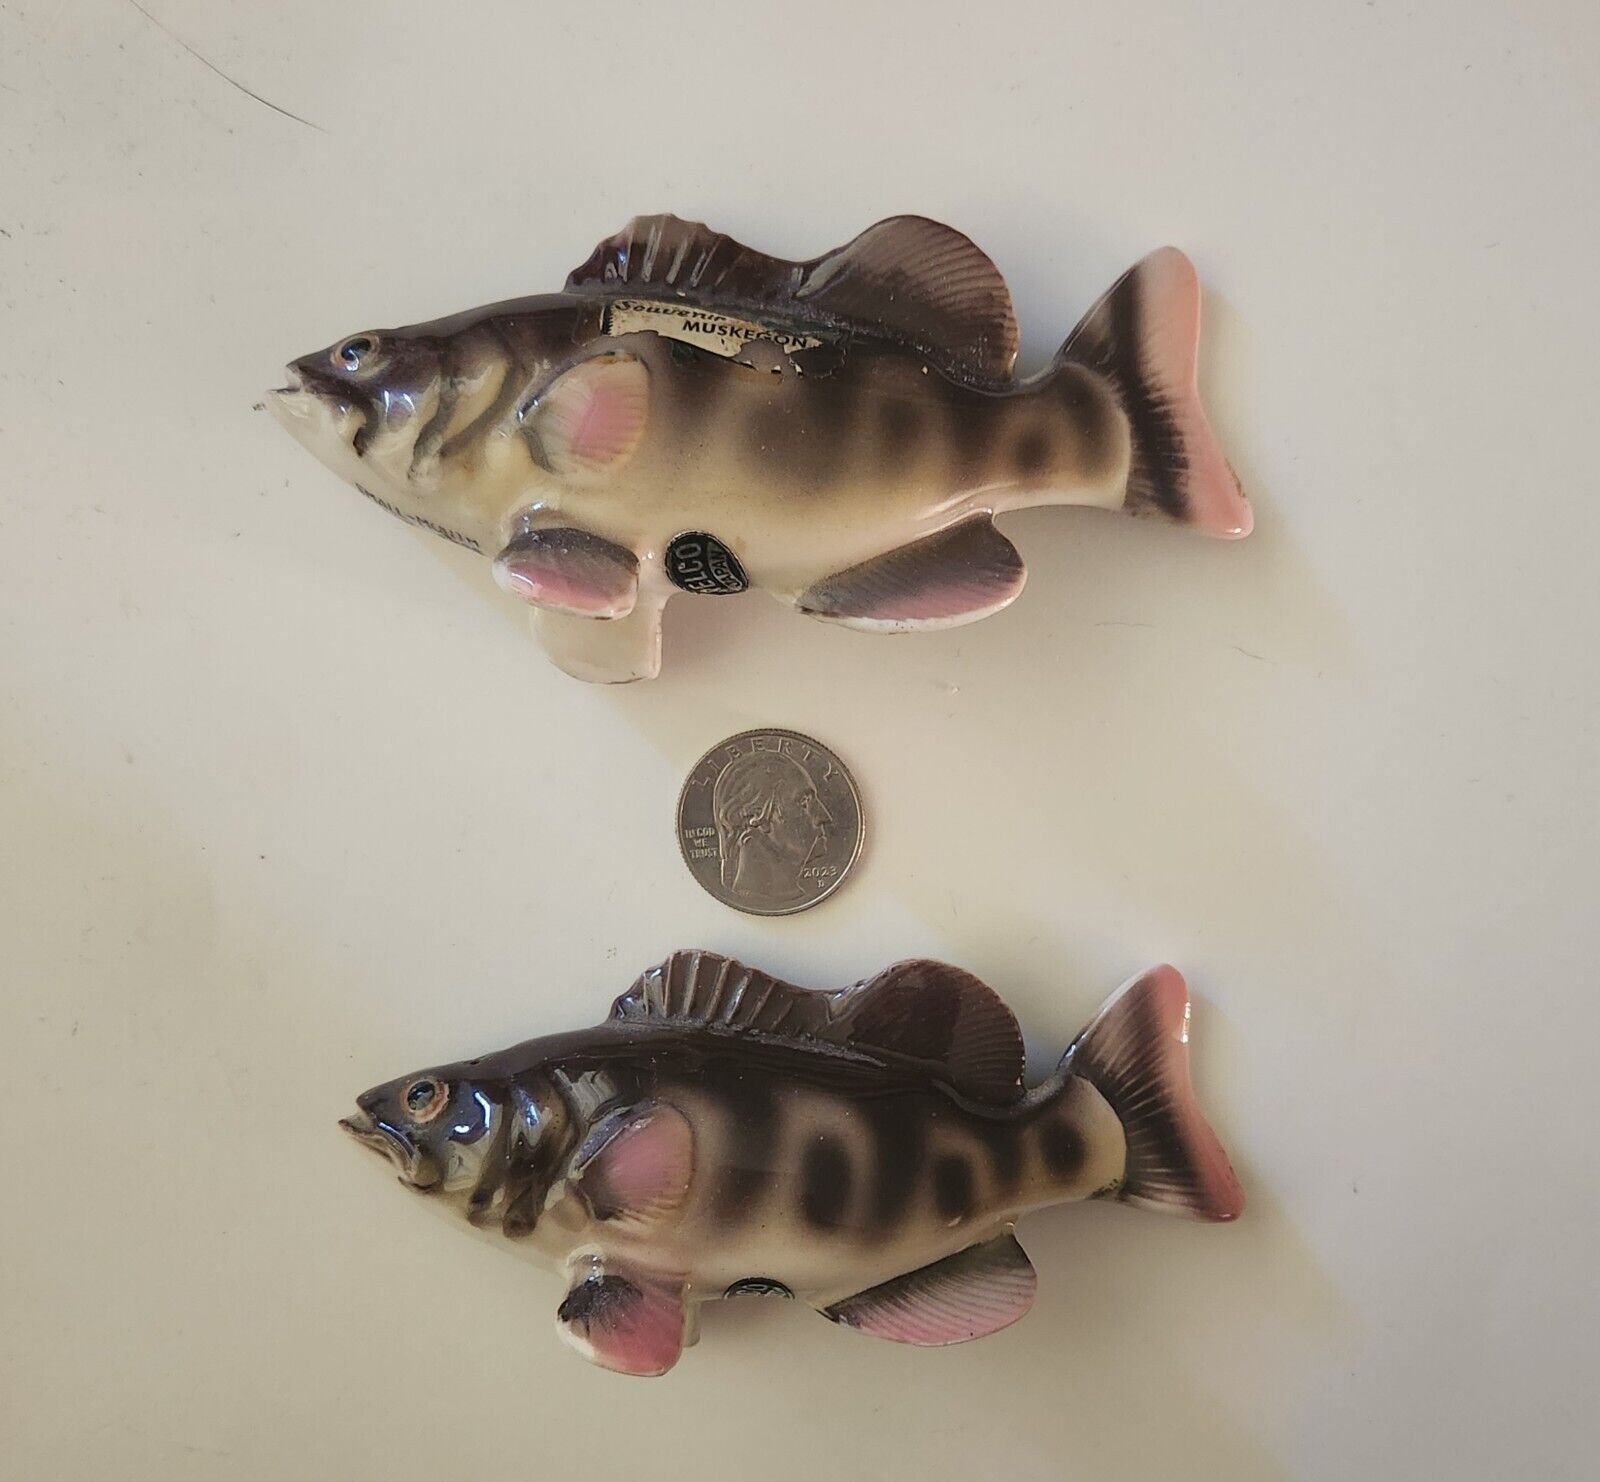 Vintage Relco Small Mouth Black Bass Salt & Pepper Shakers - Made In Japan 